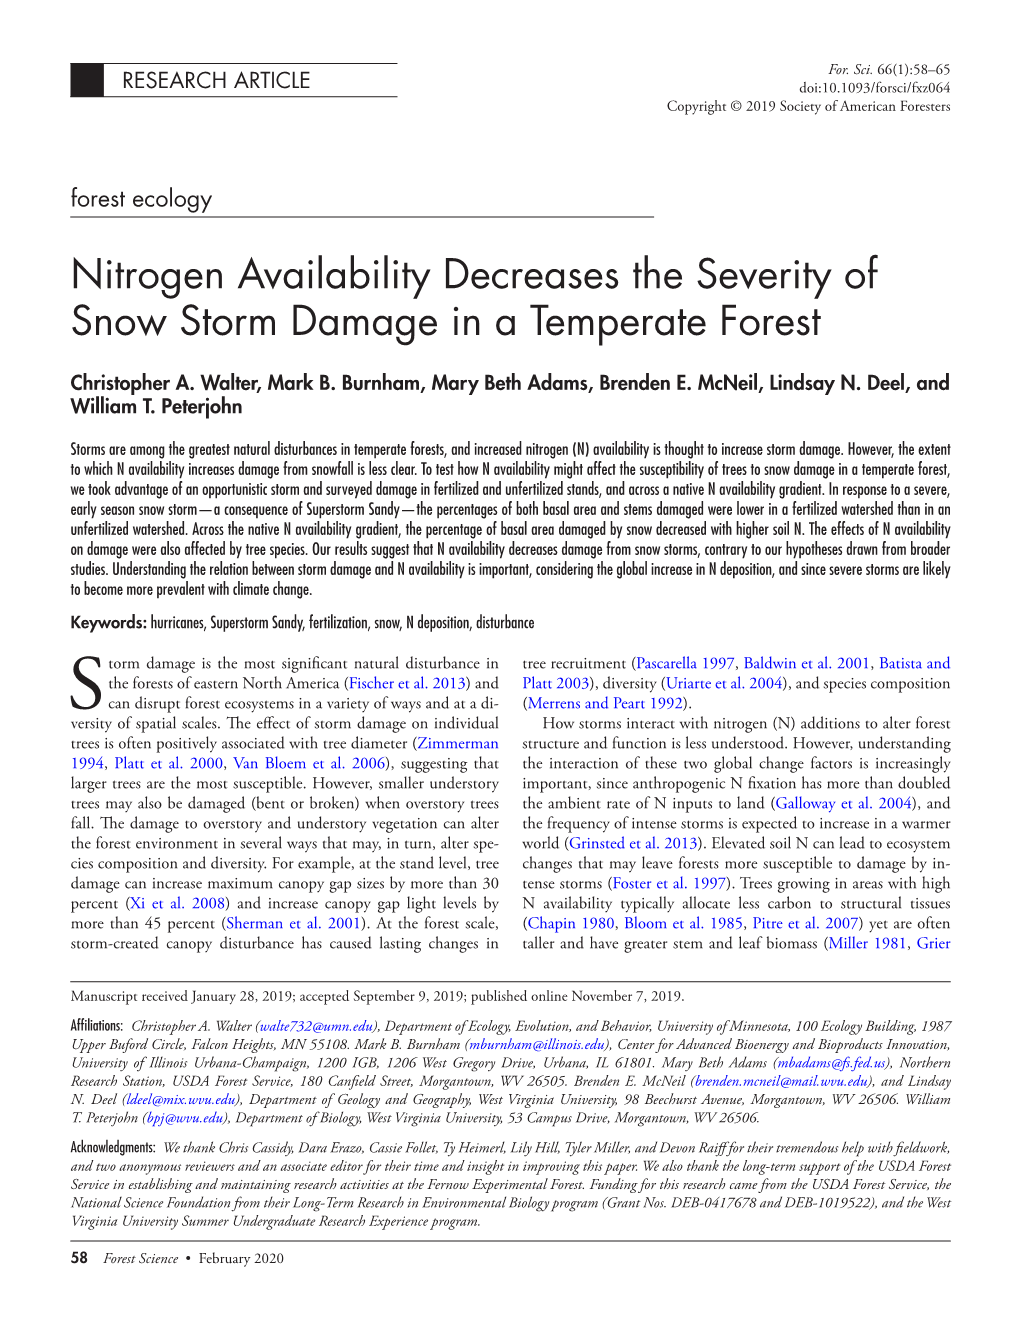 Nitrogen Availability Decreases the Severity of Snow Storm Damage in a Temperate Forest